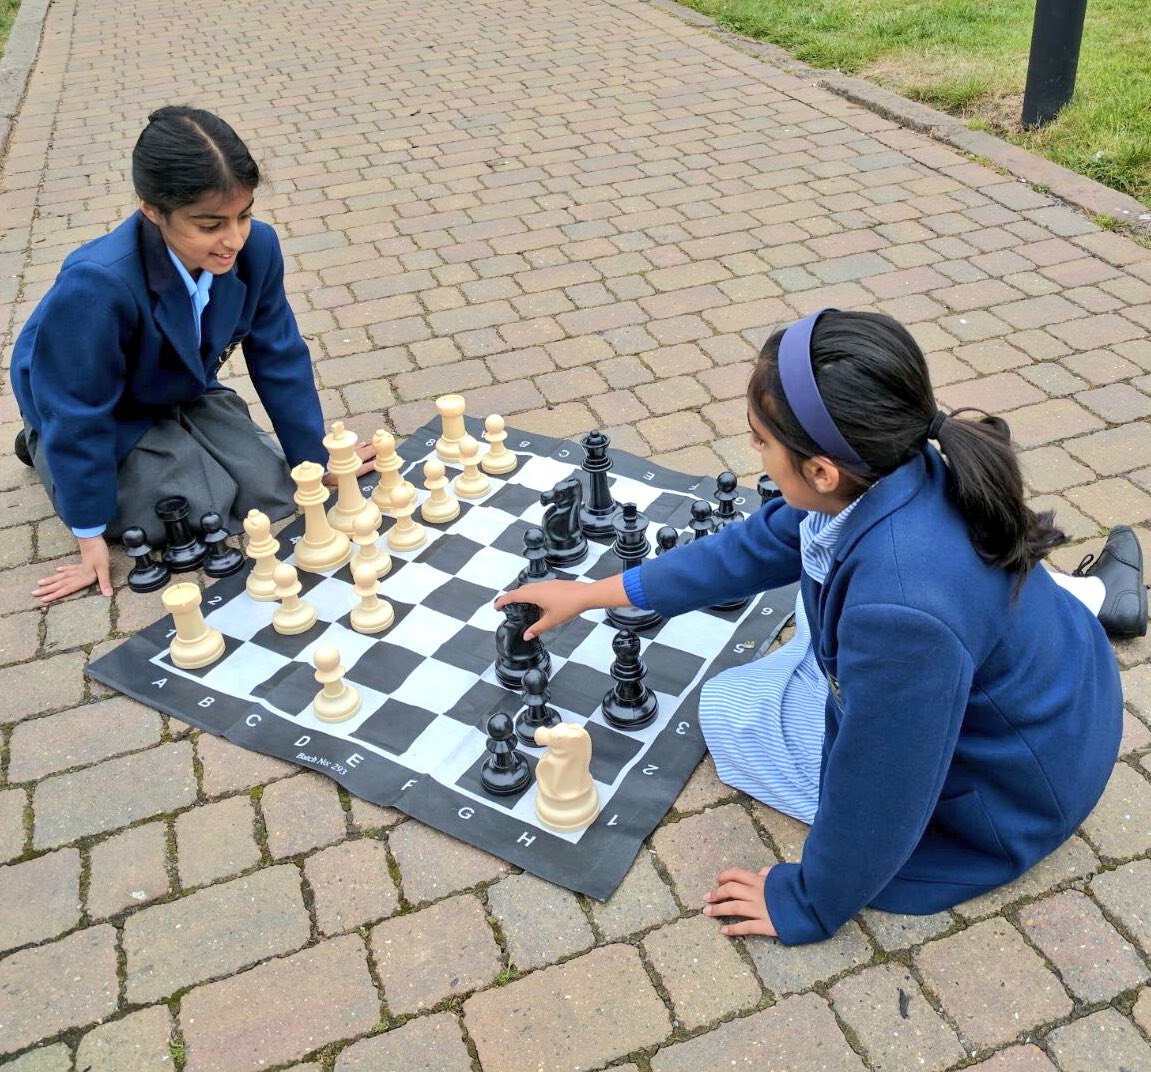 A spot of chess led by the Playleaders.